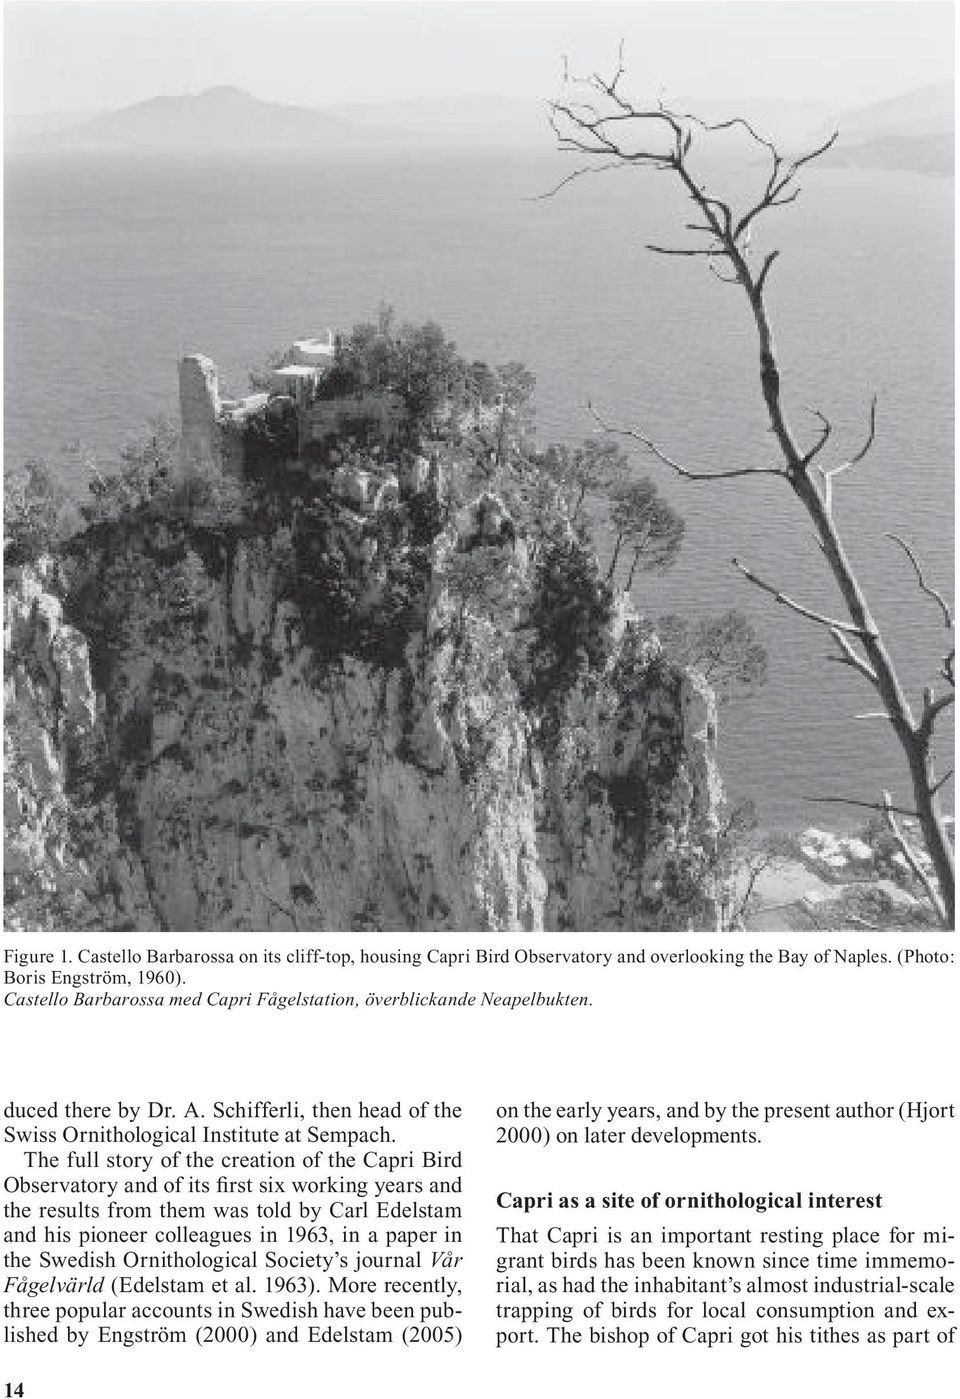 The full story of the creation of the Capri Bird Observatory and of its first six working years and the results from them was told by Carl Edelstam and his pioneer colleagues in 1963, in a paper in